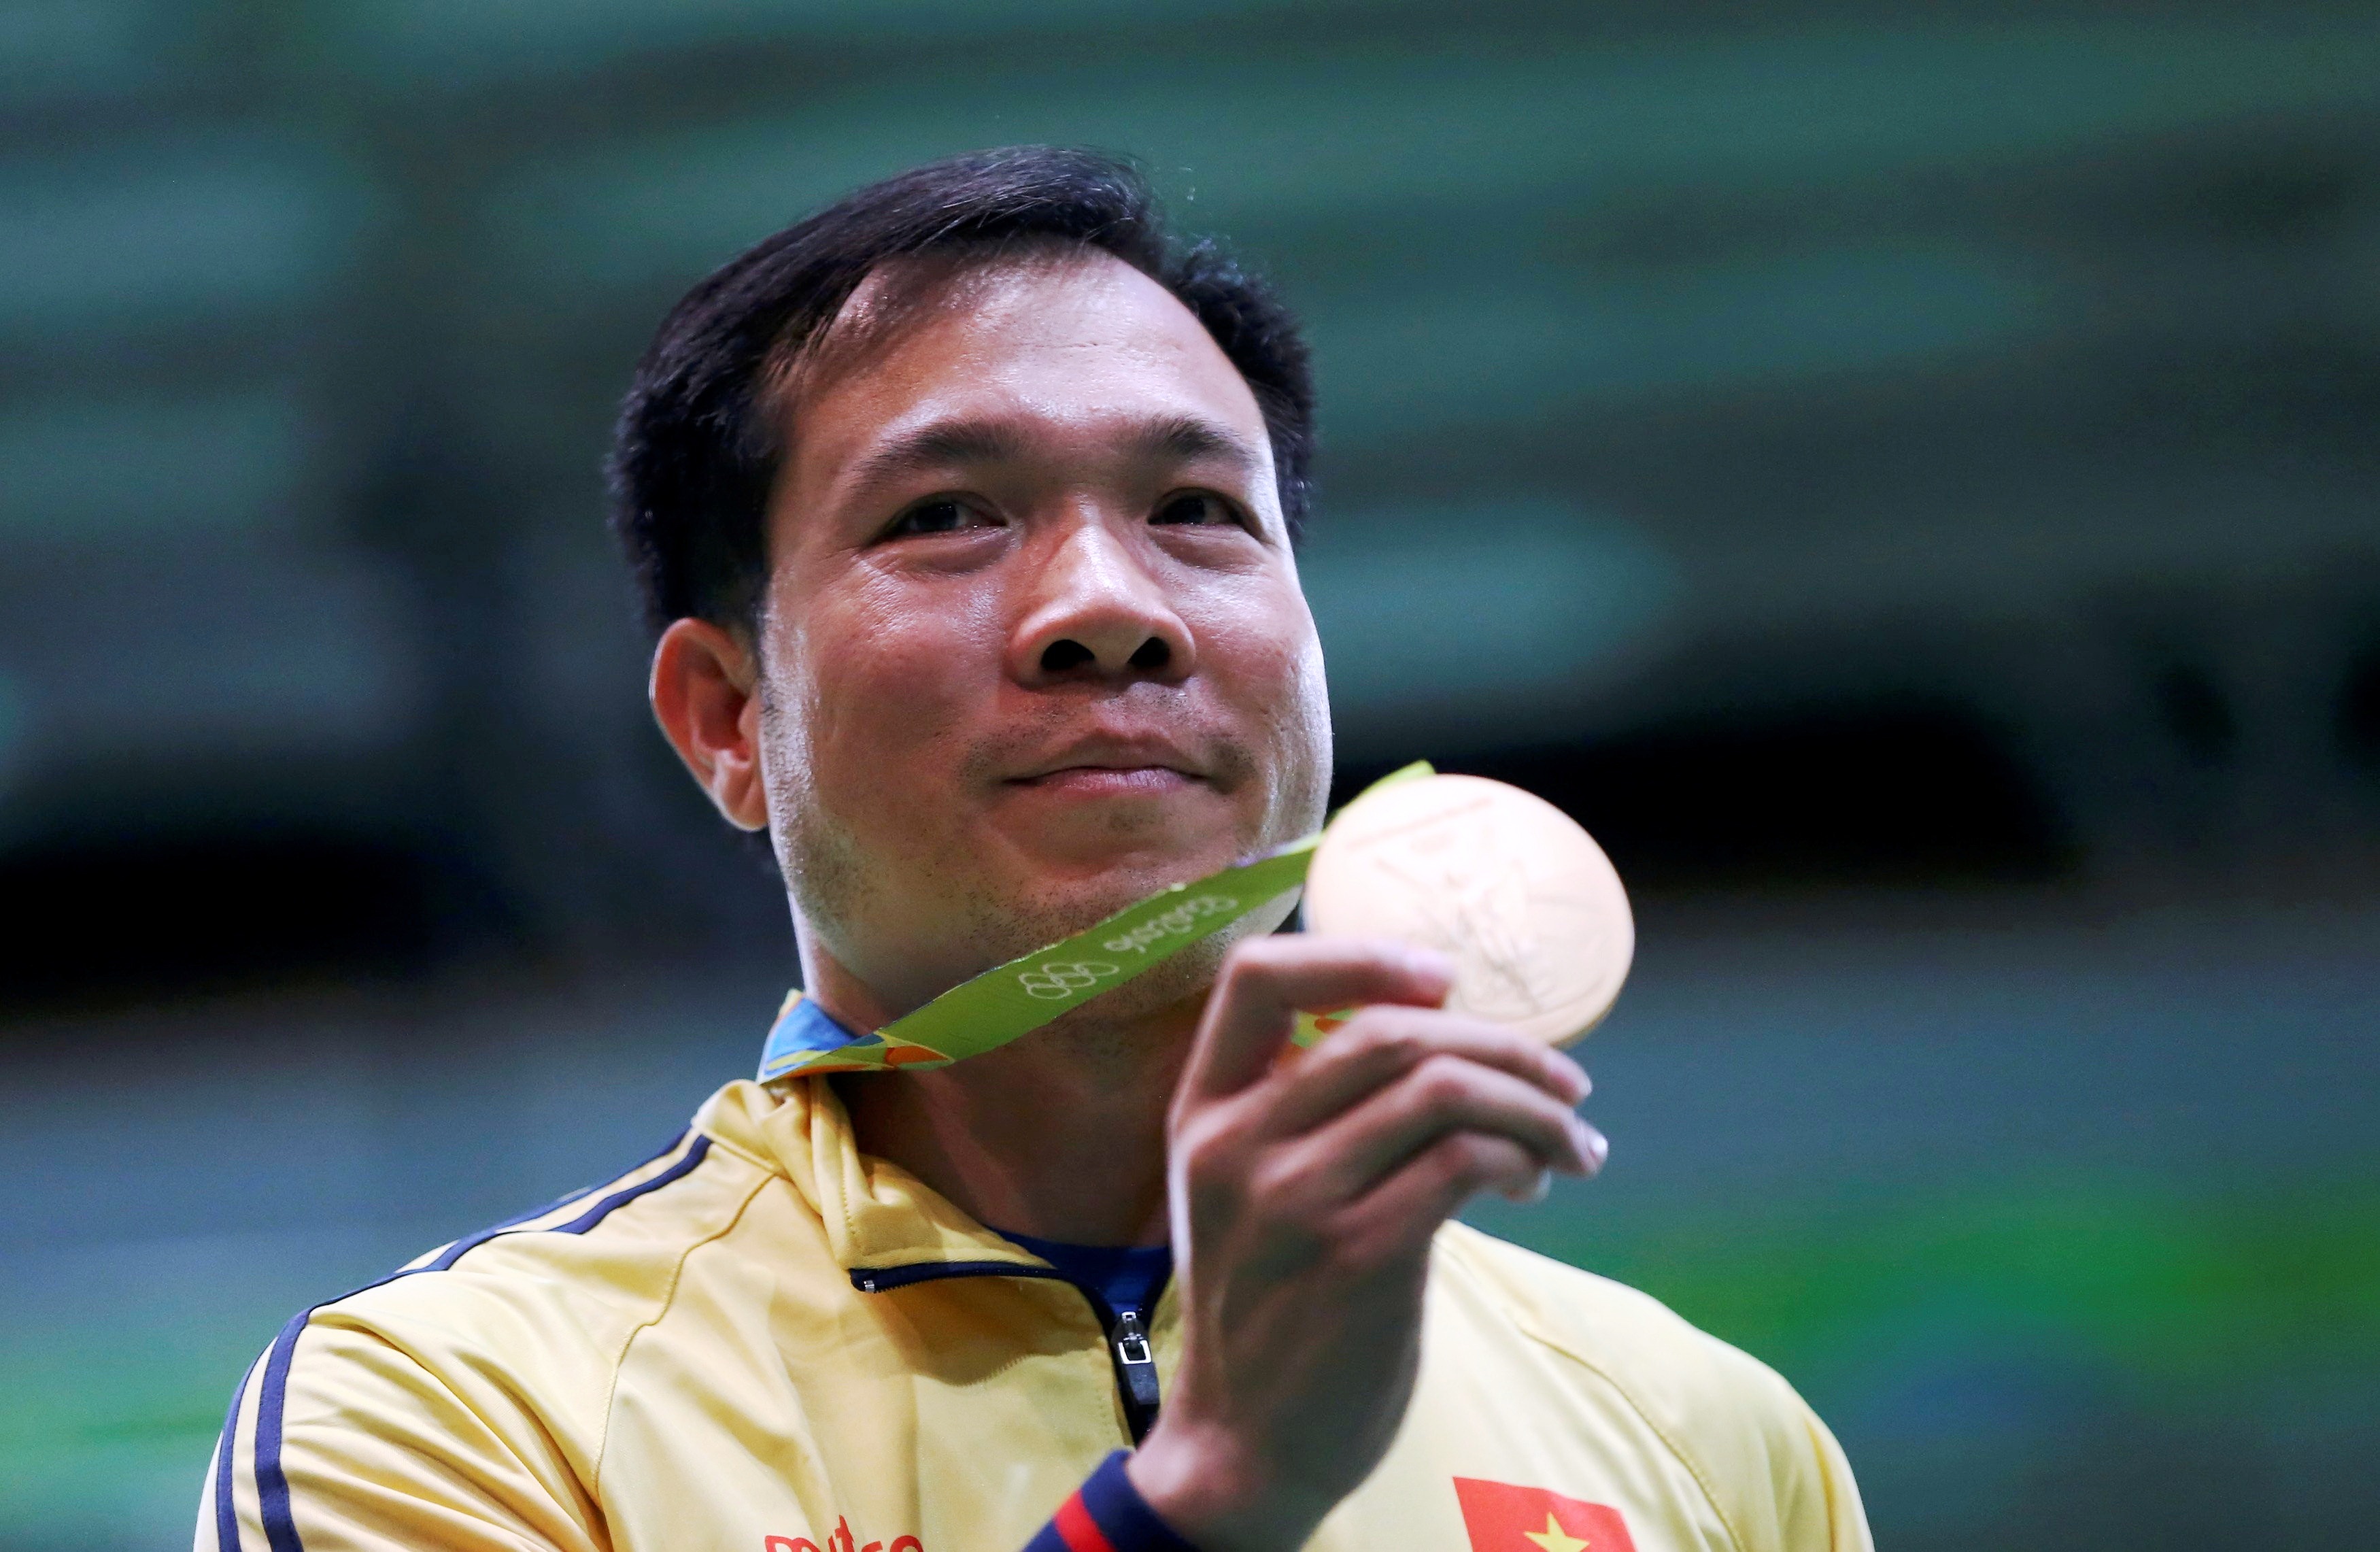 Shooter Hoang Xuan Vinh, Vietnam’s first Olympic gold medalist, is actually short-sighted